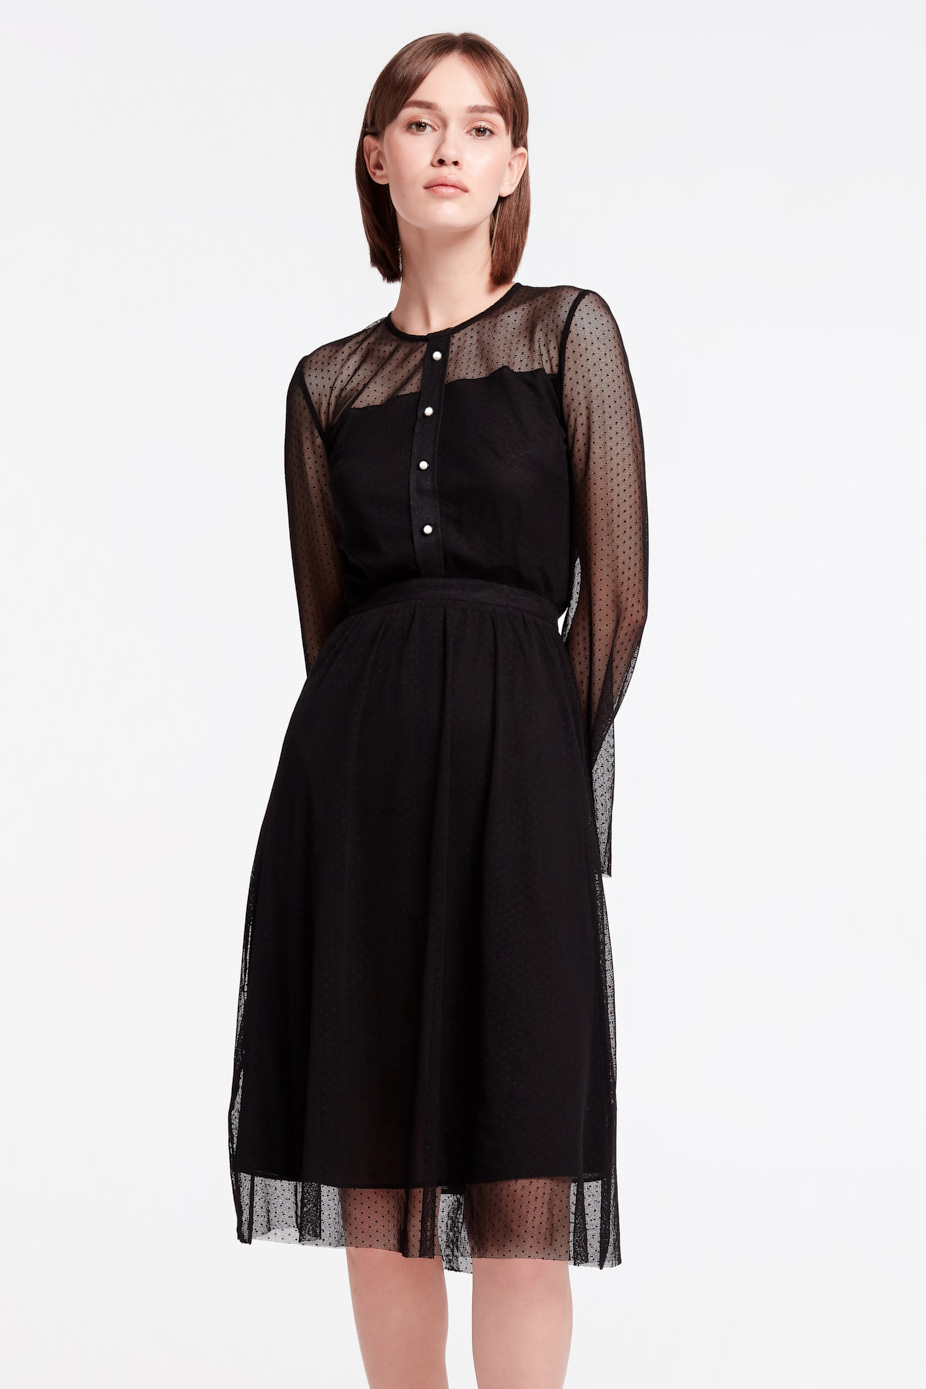 Black lace dress with buttons, photo 9